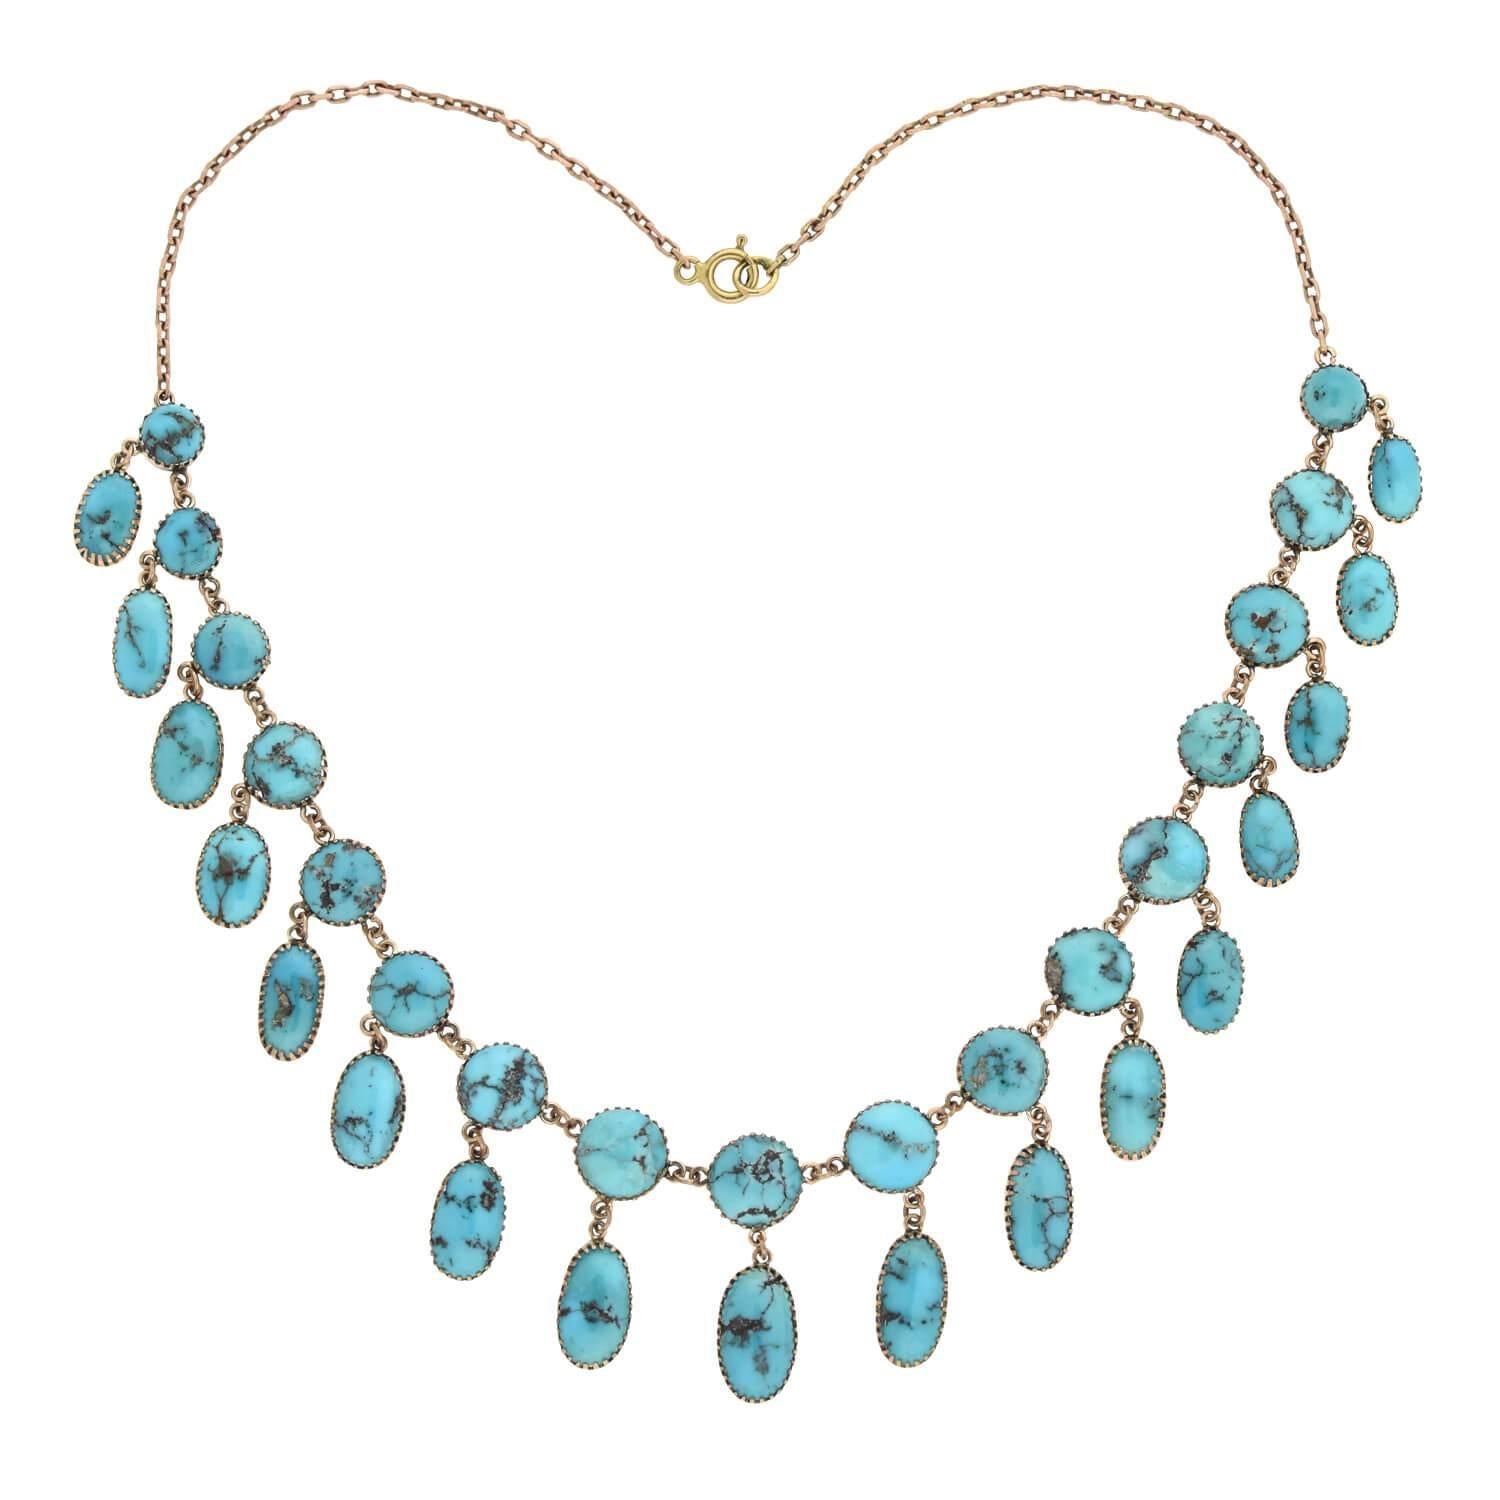 A stunning turquoise necklace from the Victorian (ca1880s) era! This lovely piece is set in 14kt rose gold and is comprised of 17 round cabochon and 17 oval-shaped turquoise stones. Each of the oval shaped stones dangle from the round turquoise